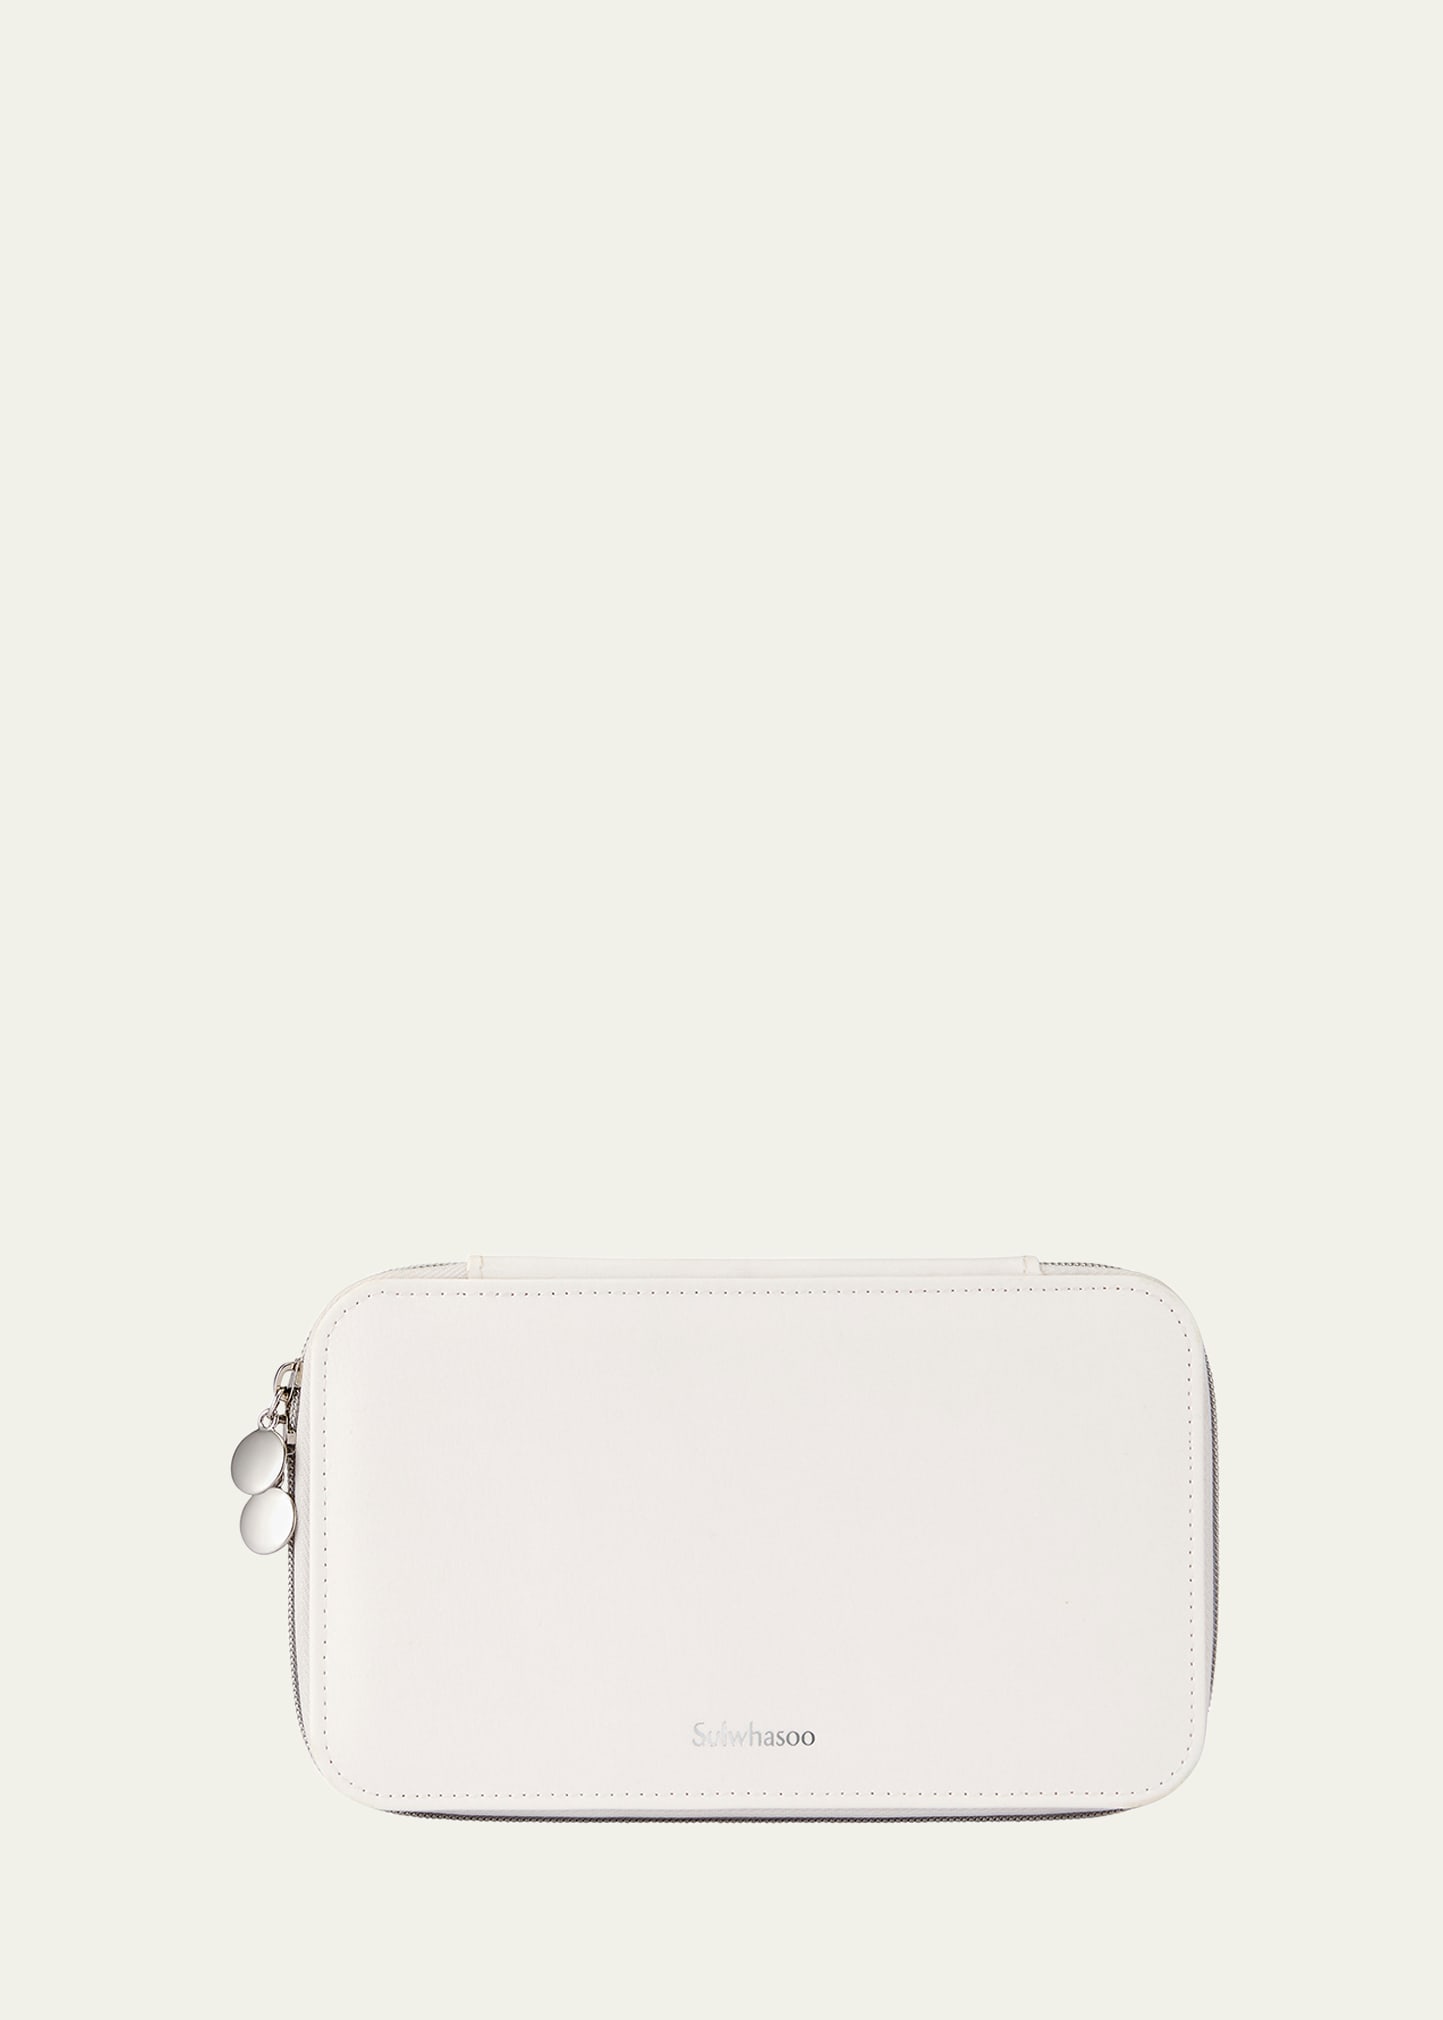 Vegan Leather Pouch Set, Yours with any $500 Sulwhasoo Order